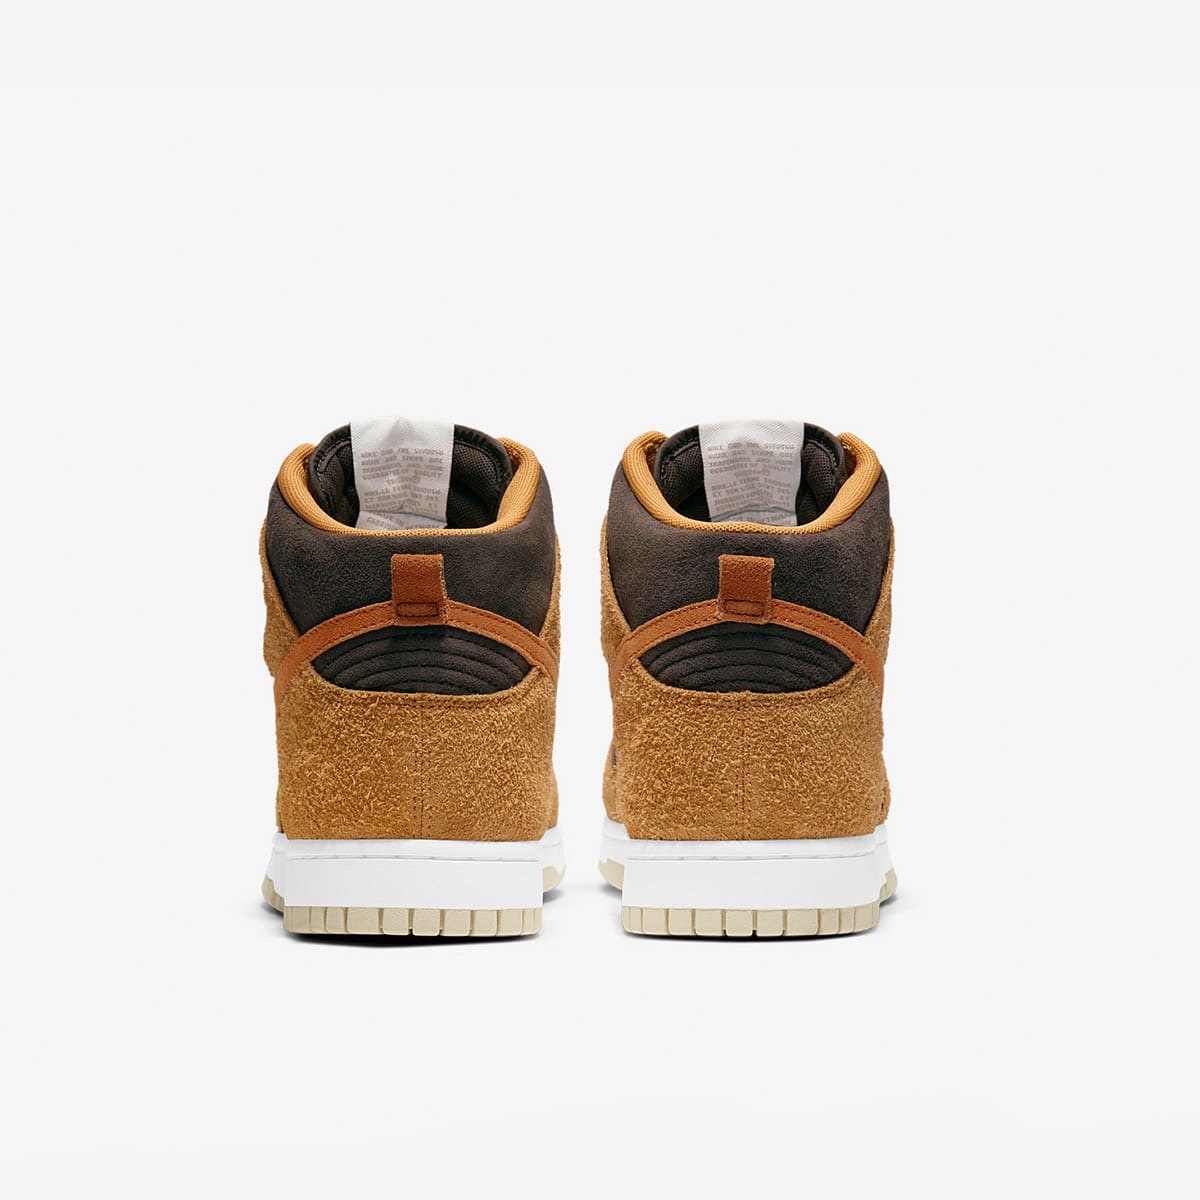 Nike Dunk Hi Retro PRM (Velvet Brown, Curry & Fossil) | END. Launches